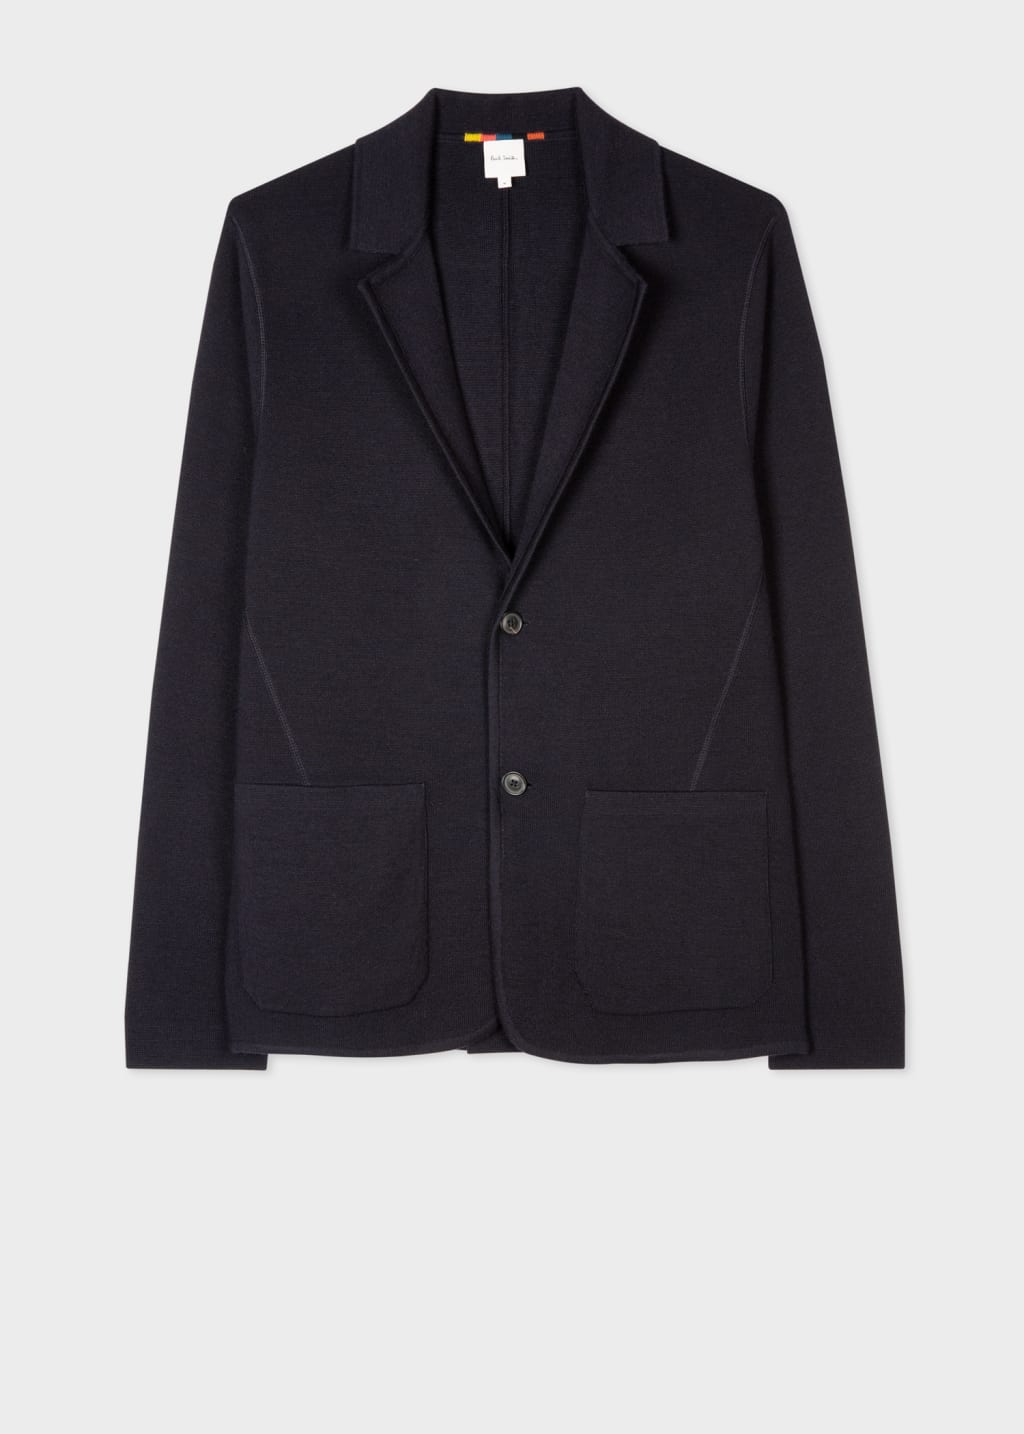 Front View - Navy Knitted Wool Cardigan Blazer Paul Smith